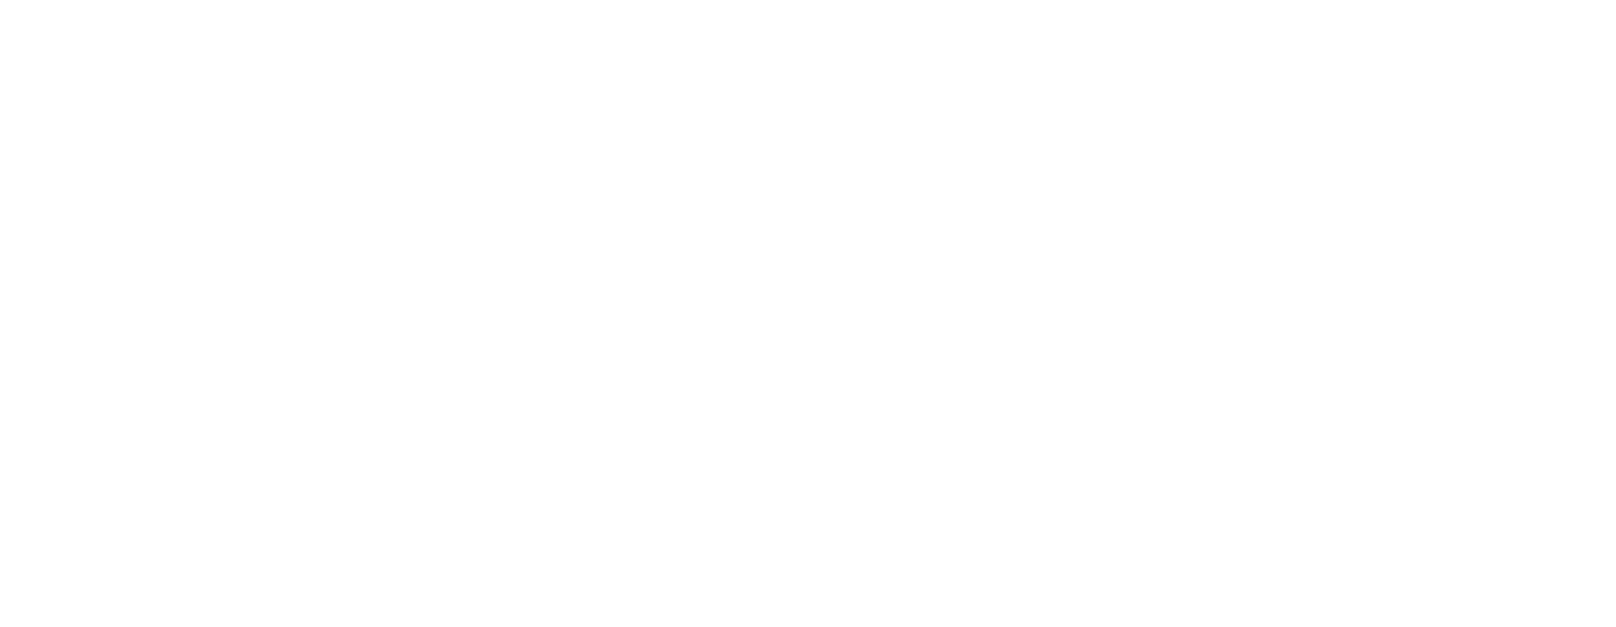 Carry On Camping logo